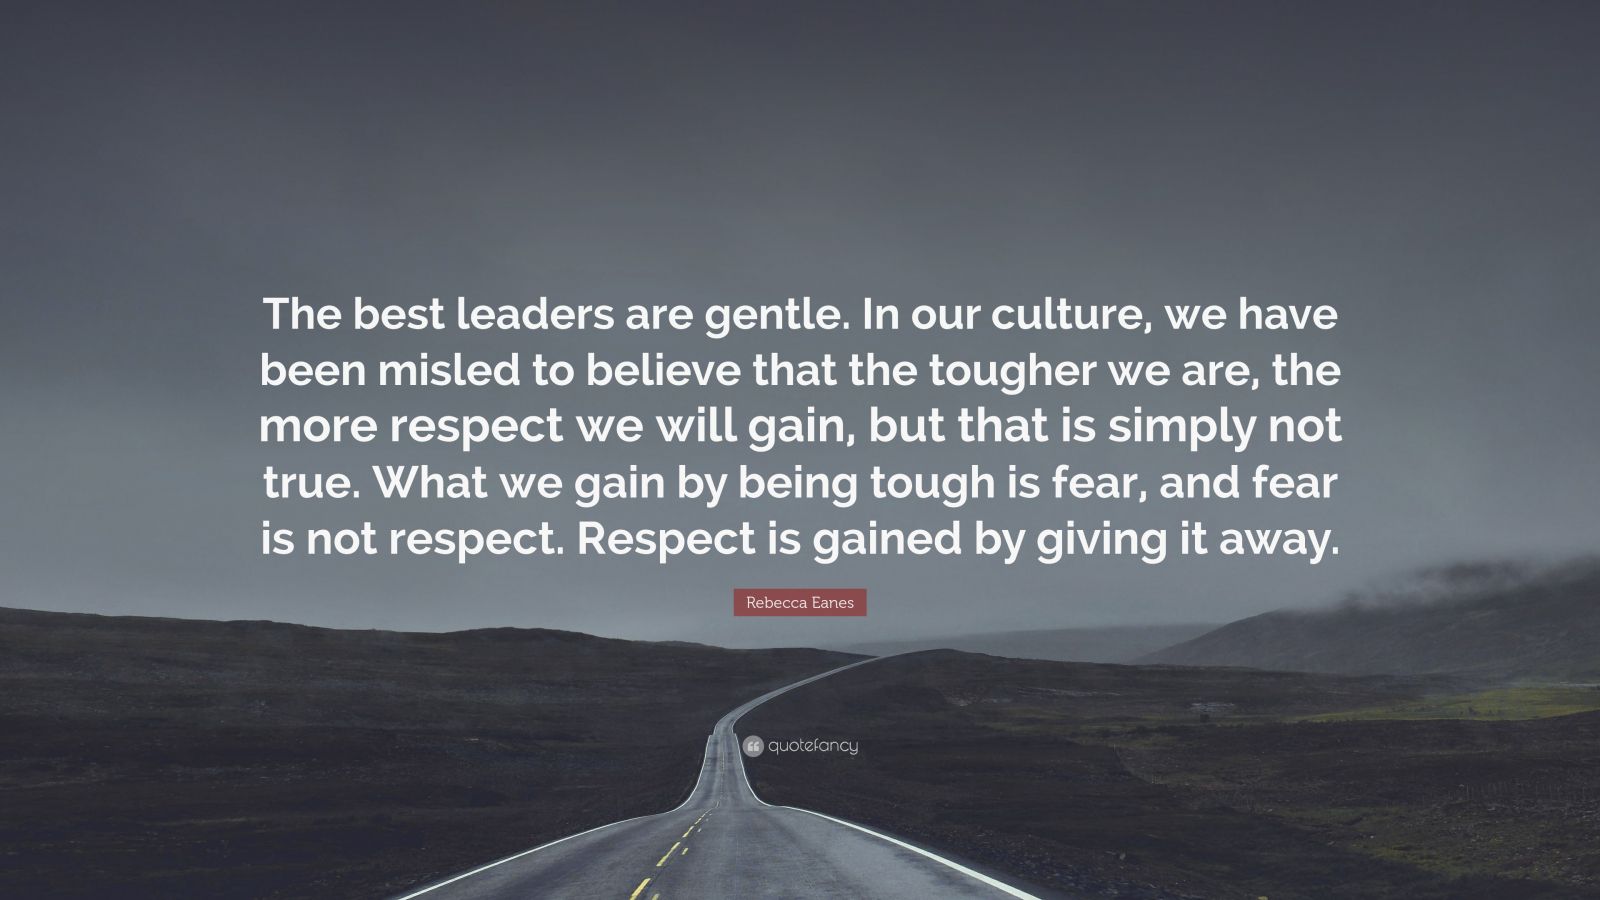 Rebecca Eanes Quote: “The best leaders are gentle. In our culture, we ...